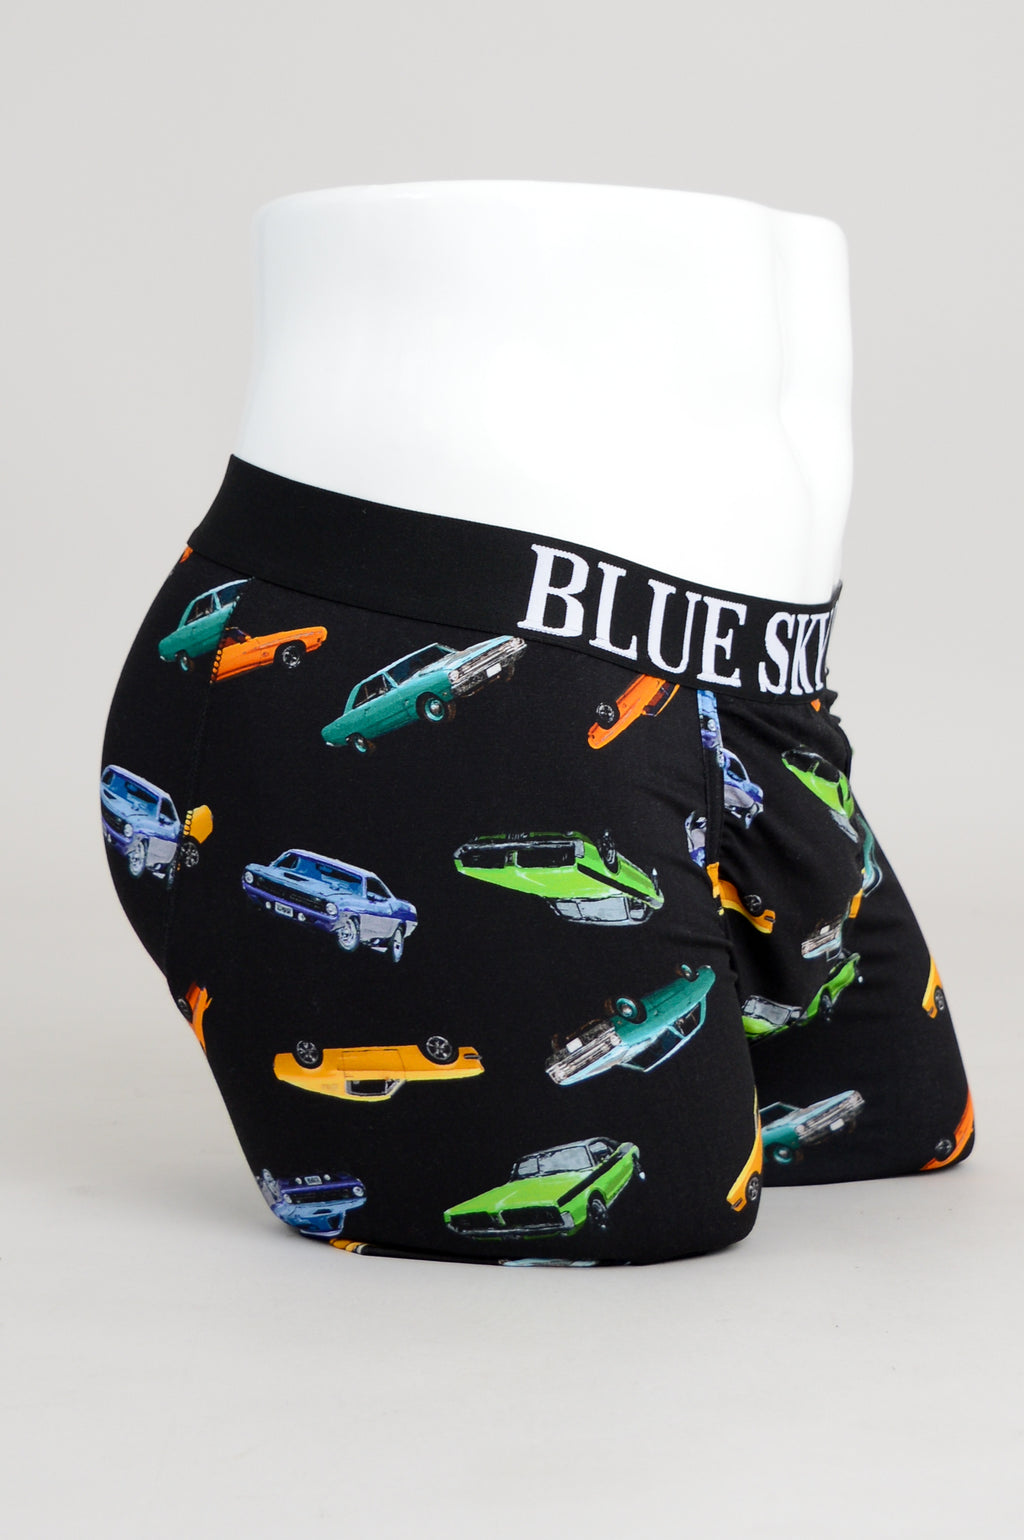 Middle Man, Muscle Cars, Bamboo – Blue Sky Clothing Co Ltd